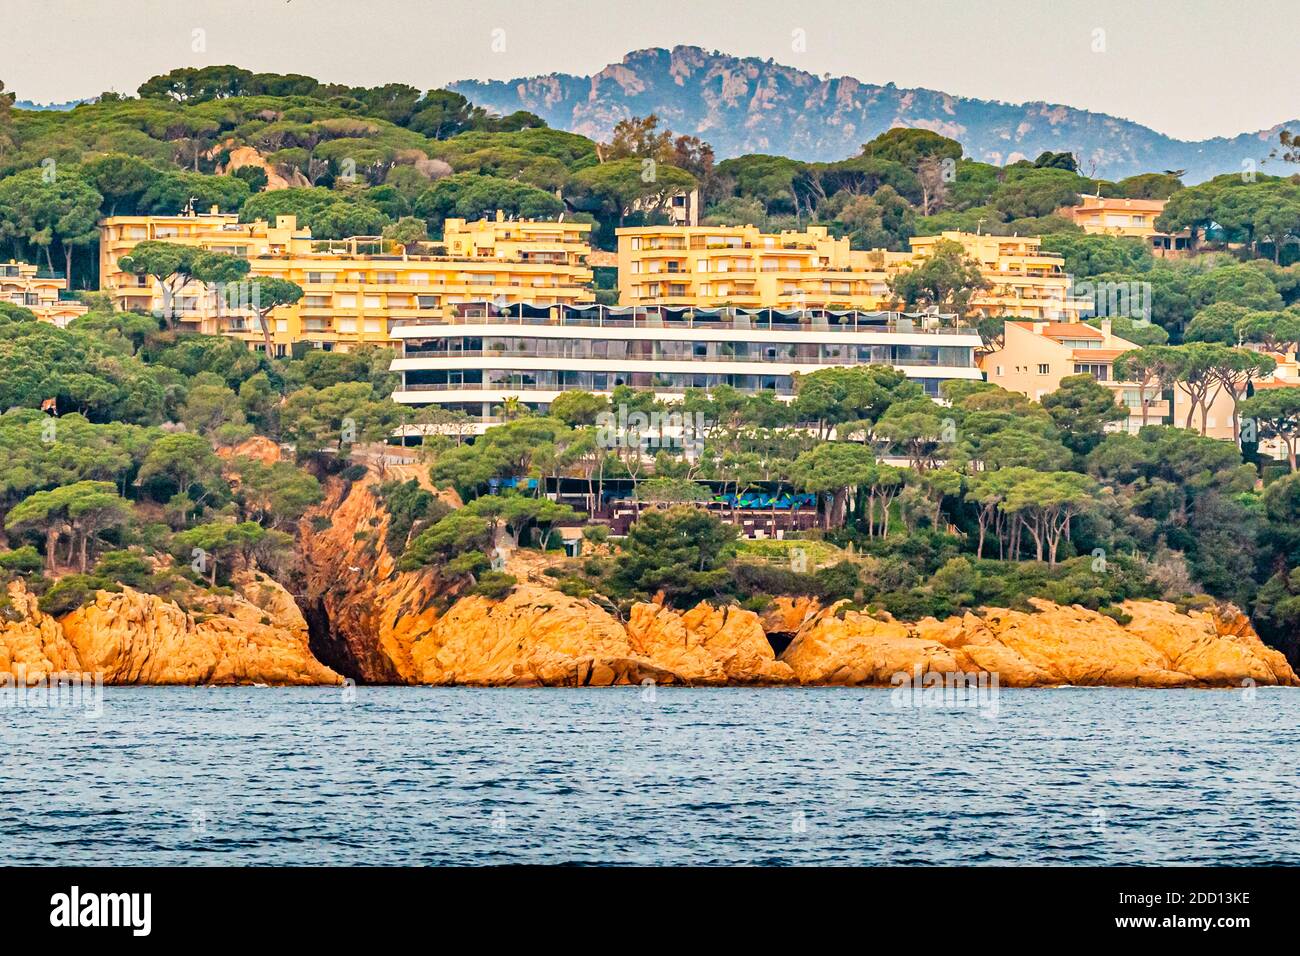 The Alabriga Hotel & Home Suites is anchored like a yacht. The Mediterranean environment lives from the contrast between the green hills of the hinterland and the deep blue of the Mediterranean in Sant Feliu de Guíxols, Spain Stock Photo